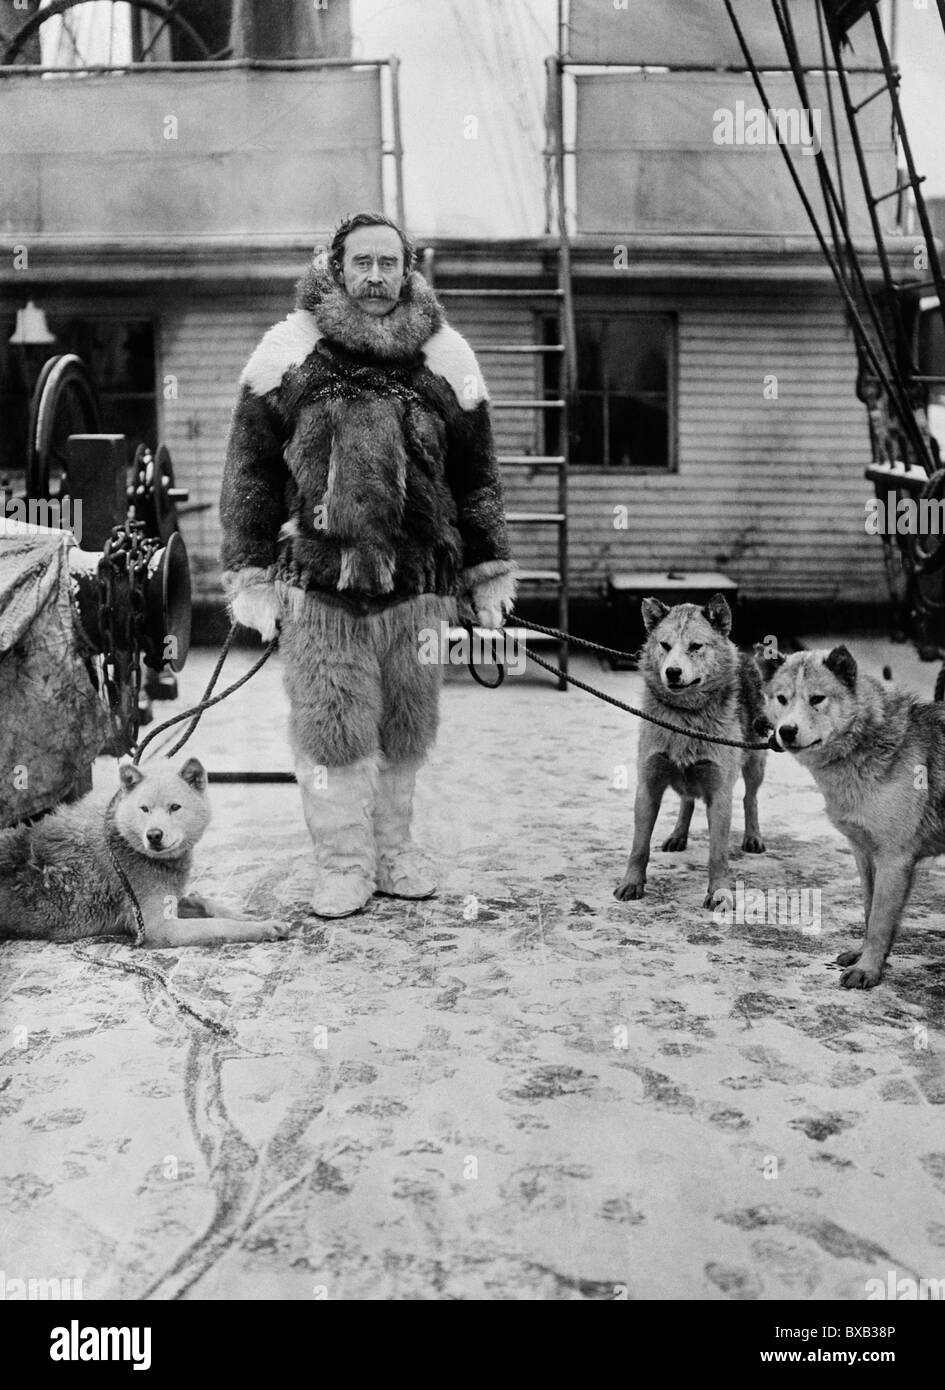 Arctic explorer Robert Peary (1856 - 1920) - the US Navy officer who claimed to have reached the North Pole in April 1909. Stock Photo